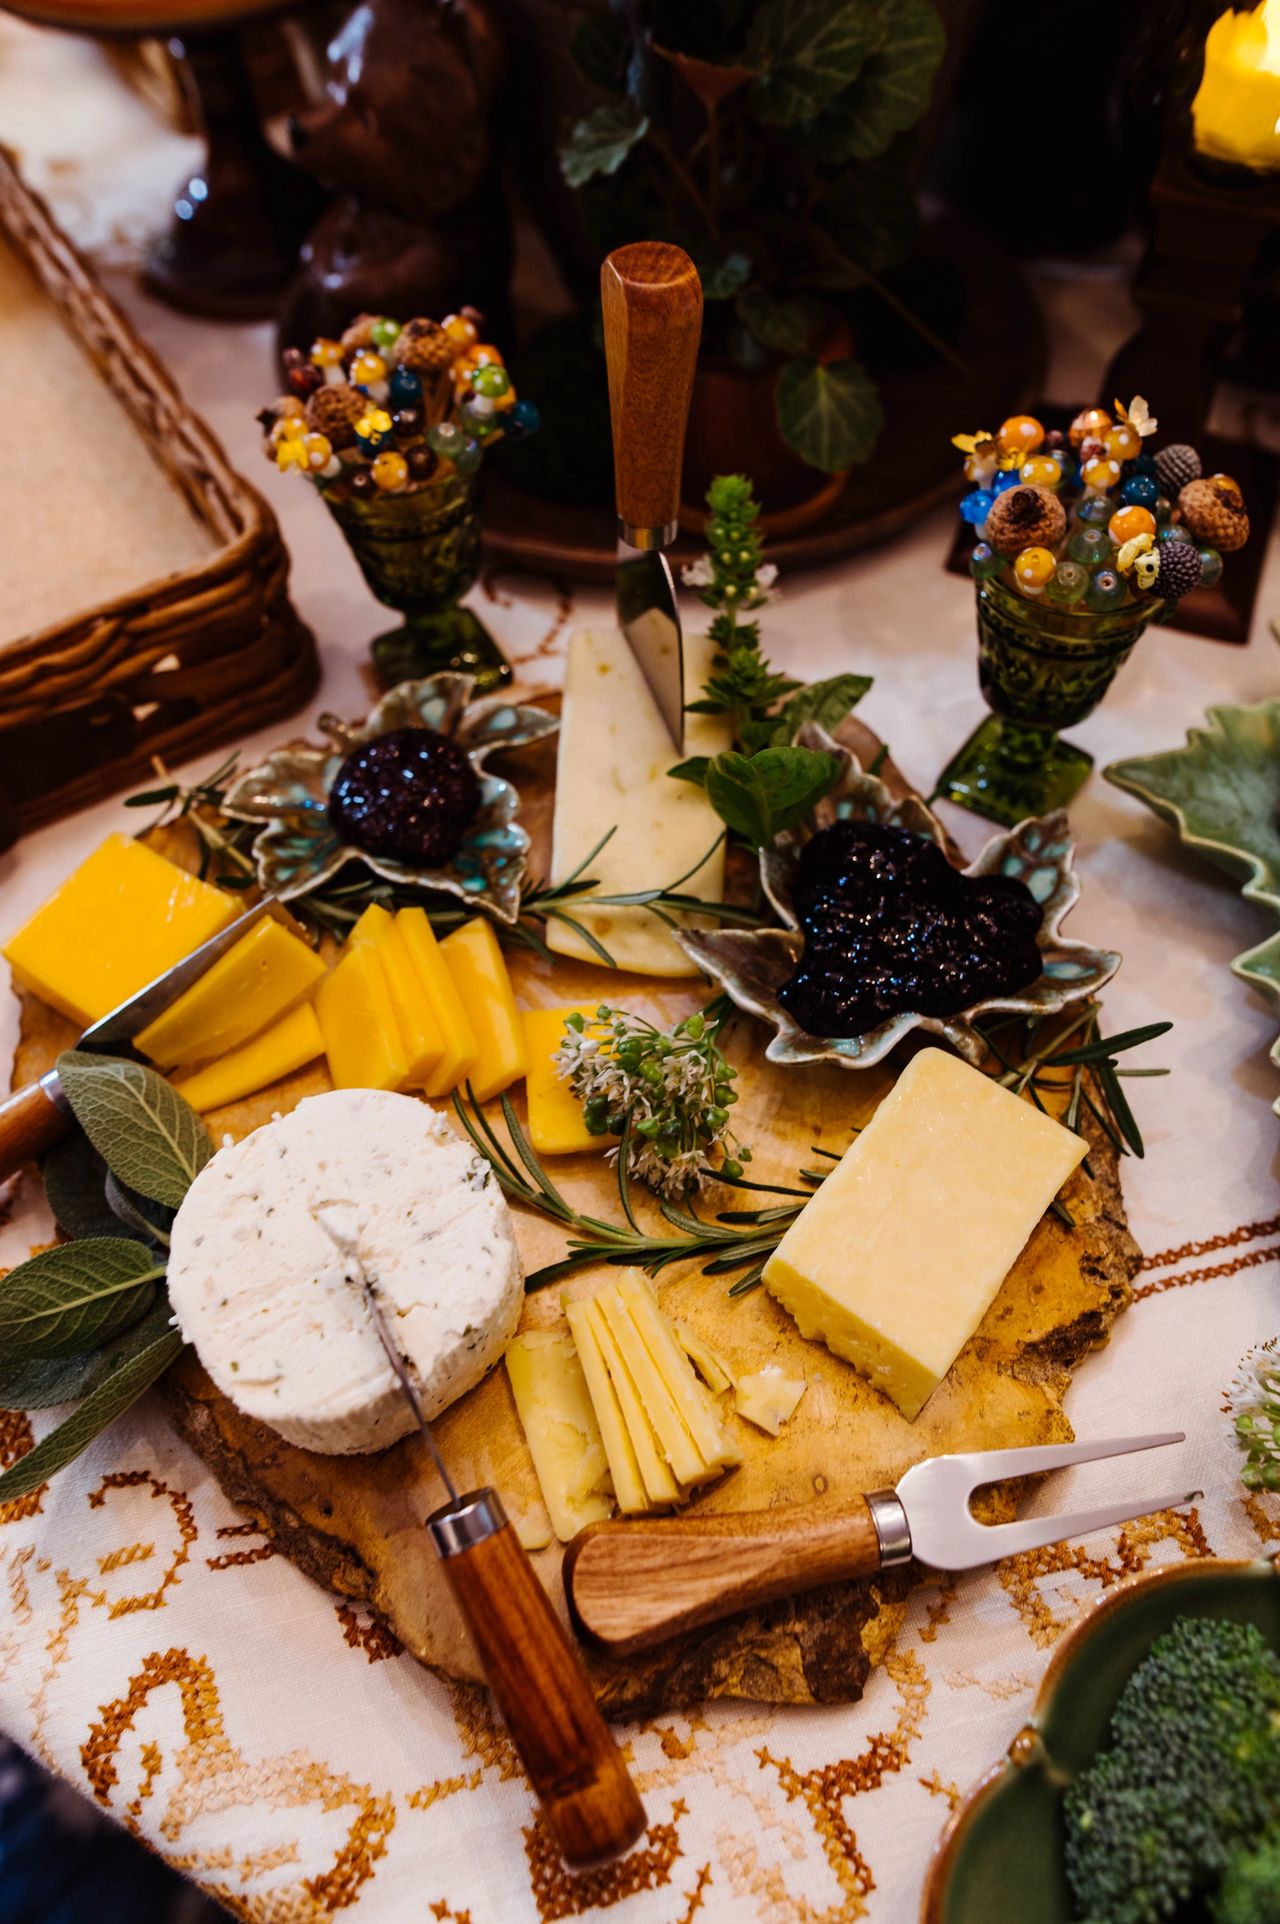 Woodland DIY cocktail picks are perfect for this autumn cheese board. Claire Keathley Photography.